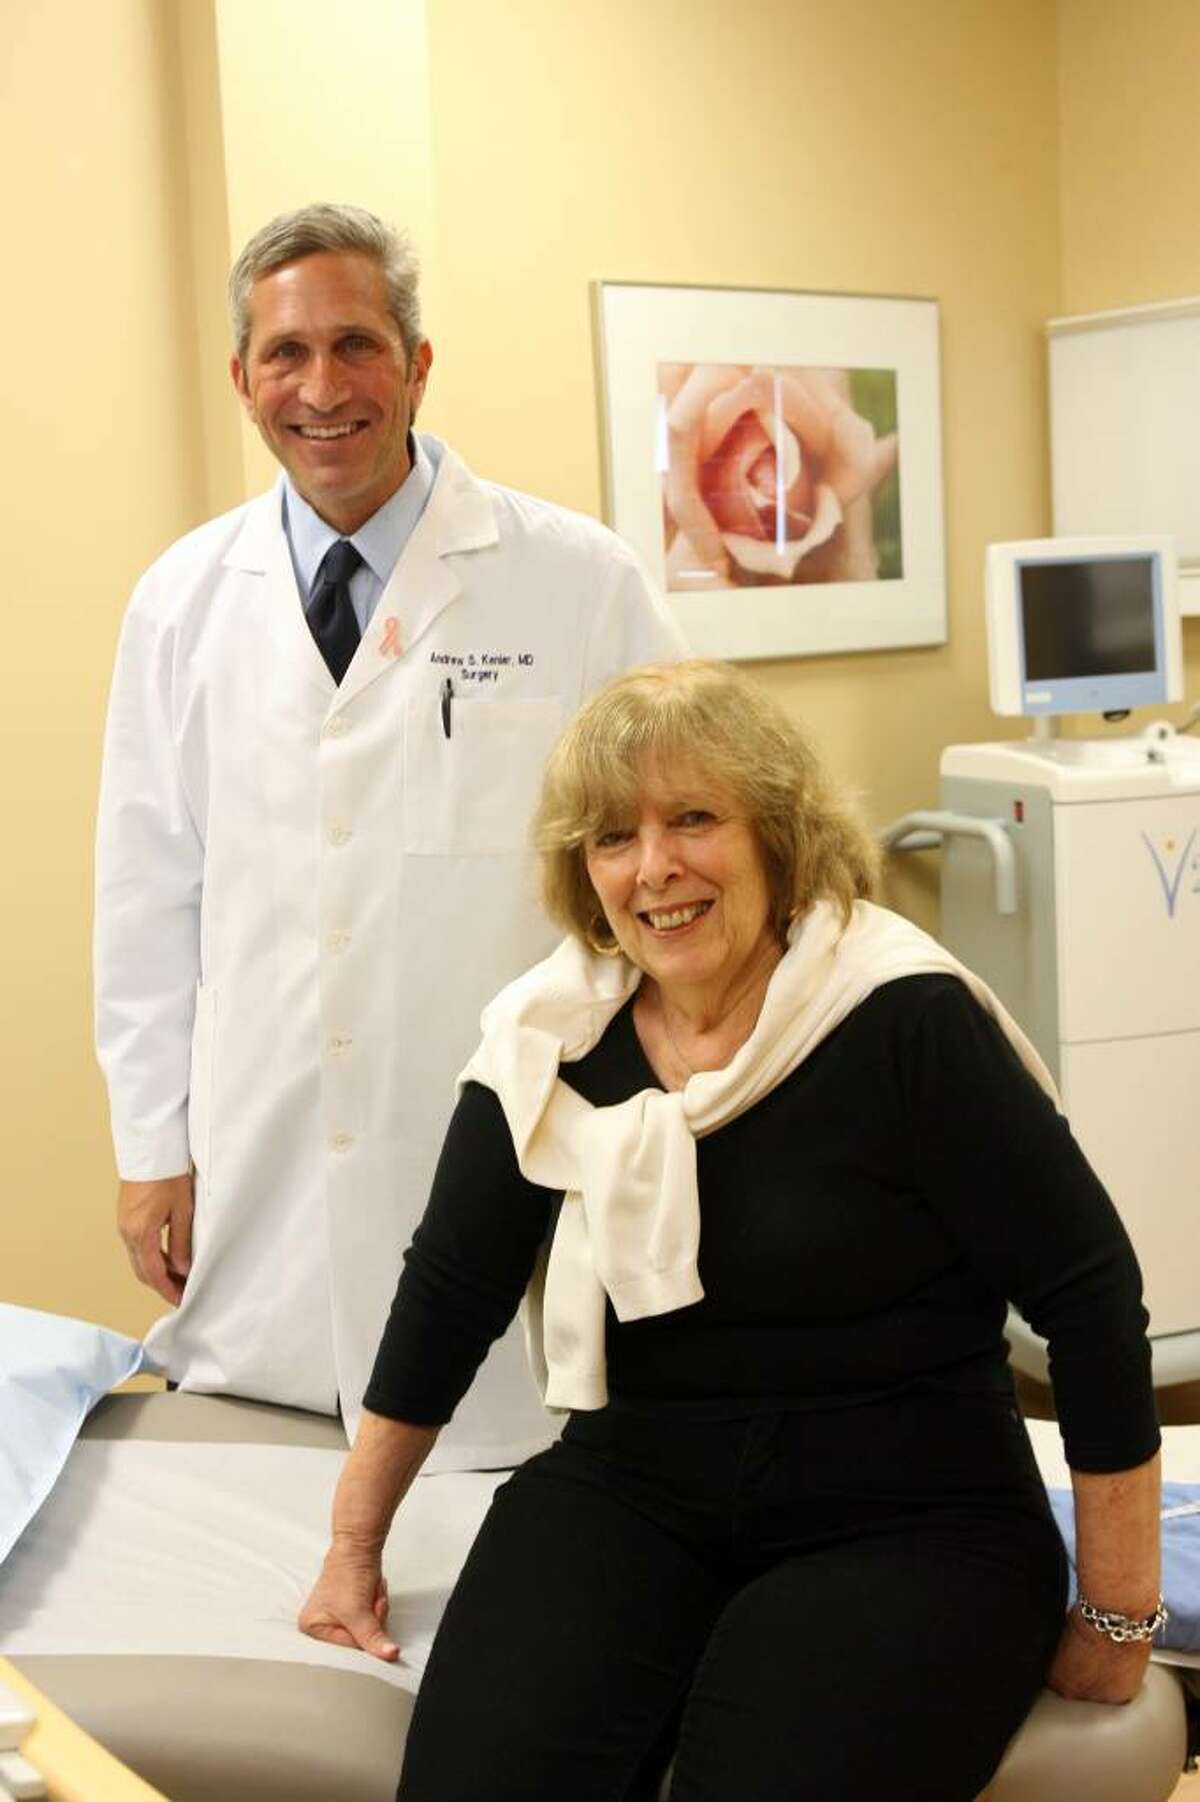 Dr Andrew Kenler stands in his Trumbull office with his patient, Judith Kudikoff of Bridgeport. Kenler ran a trial for a new treatment for breast cancer, which successfully treated Kudikoff.